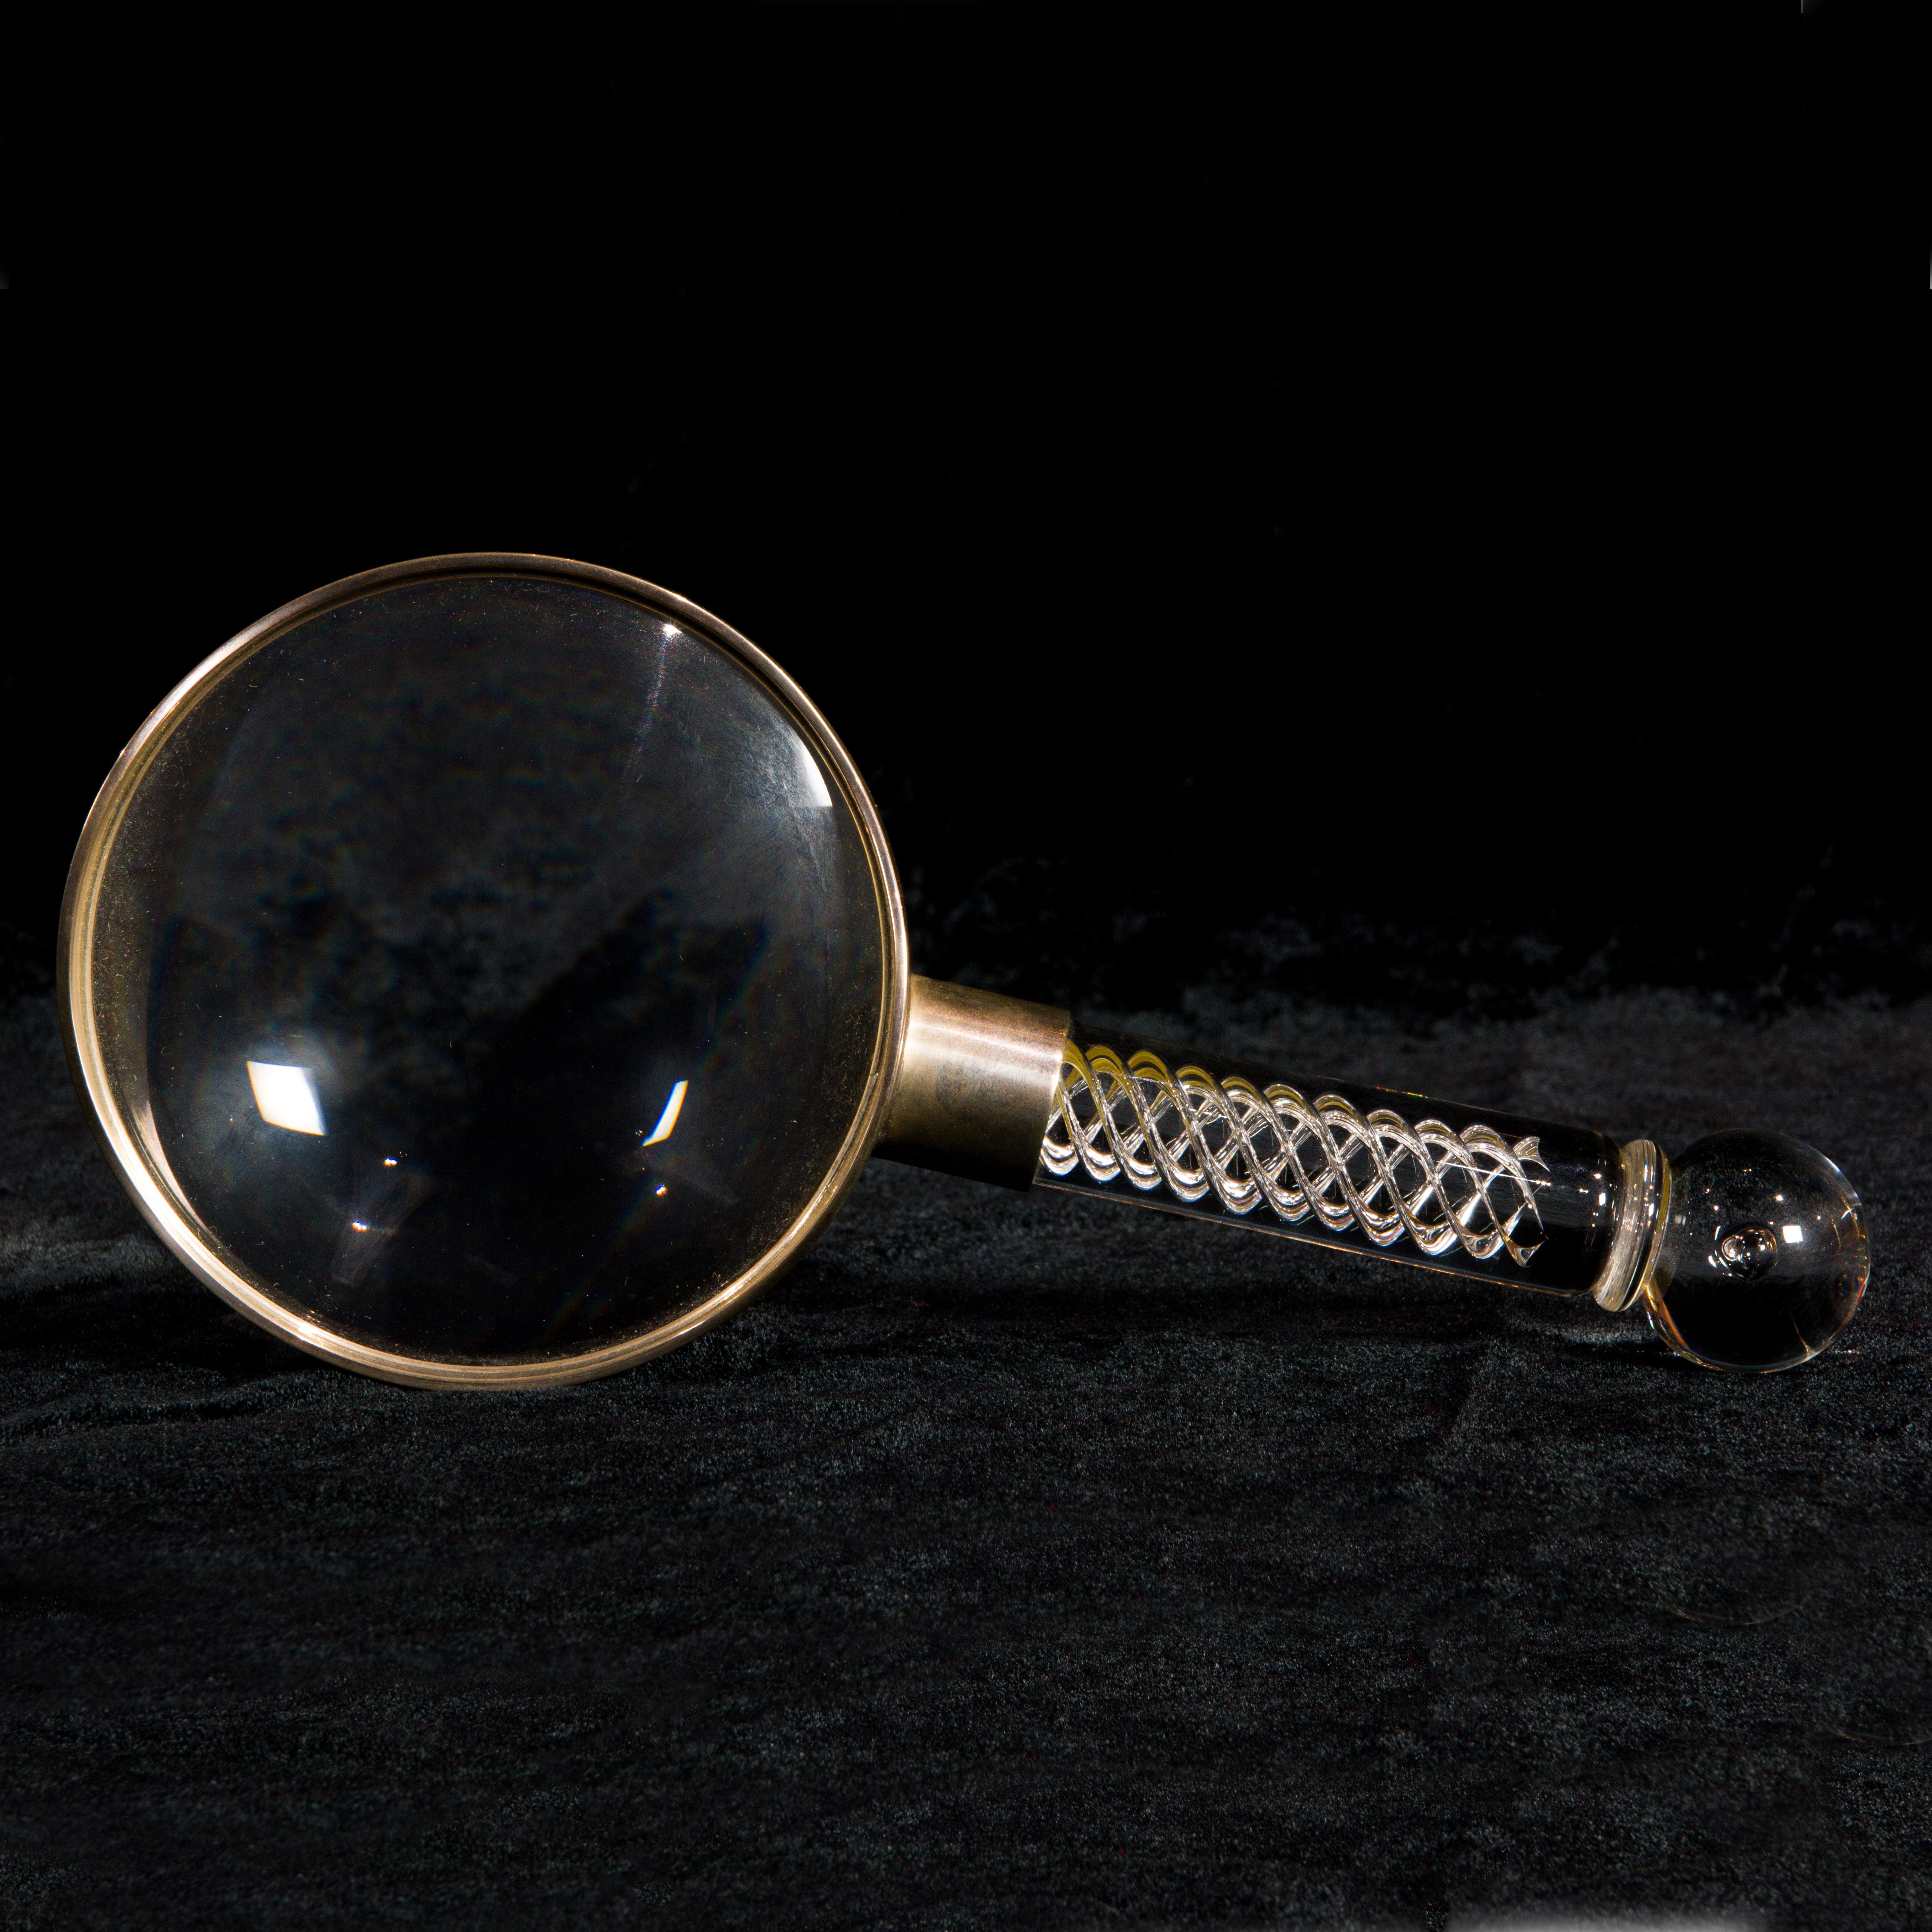 A STEUBEN GLASS AND STERLING SILVER